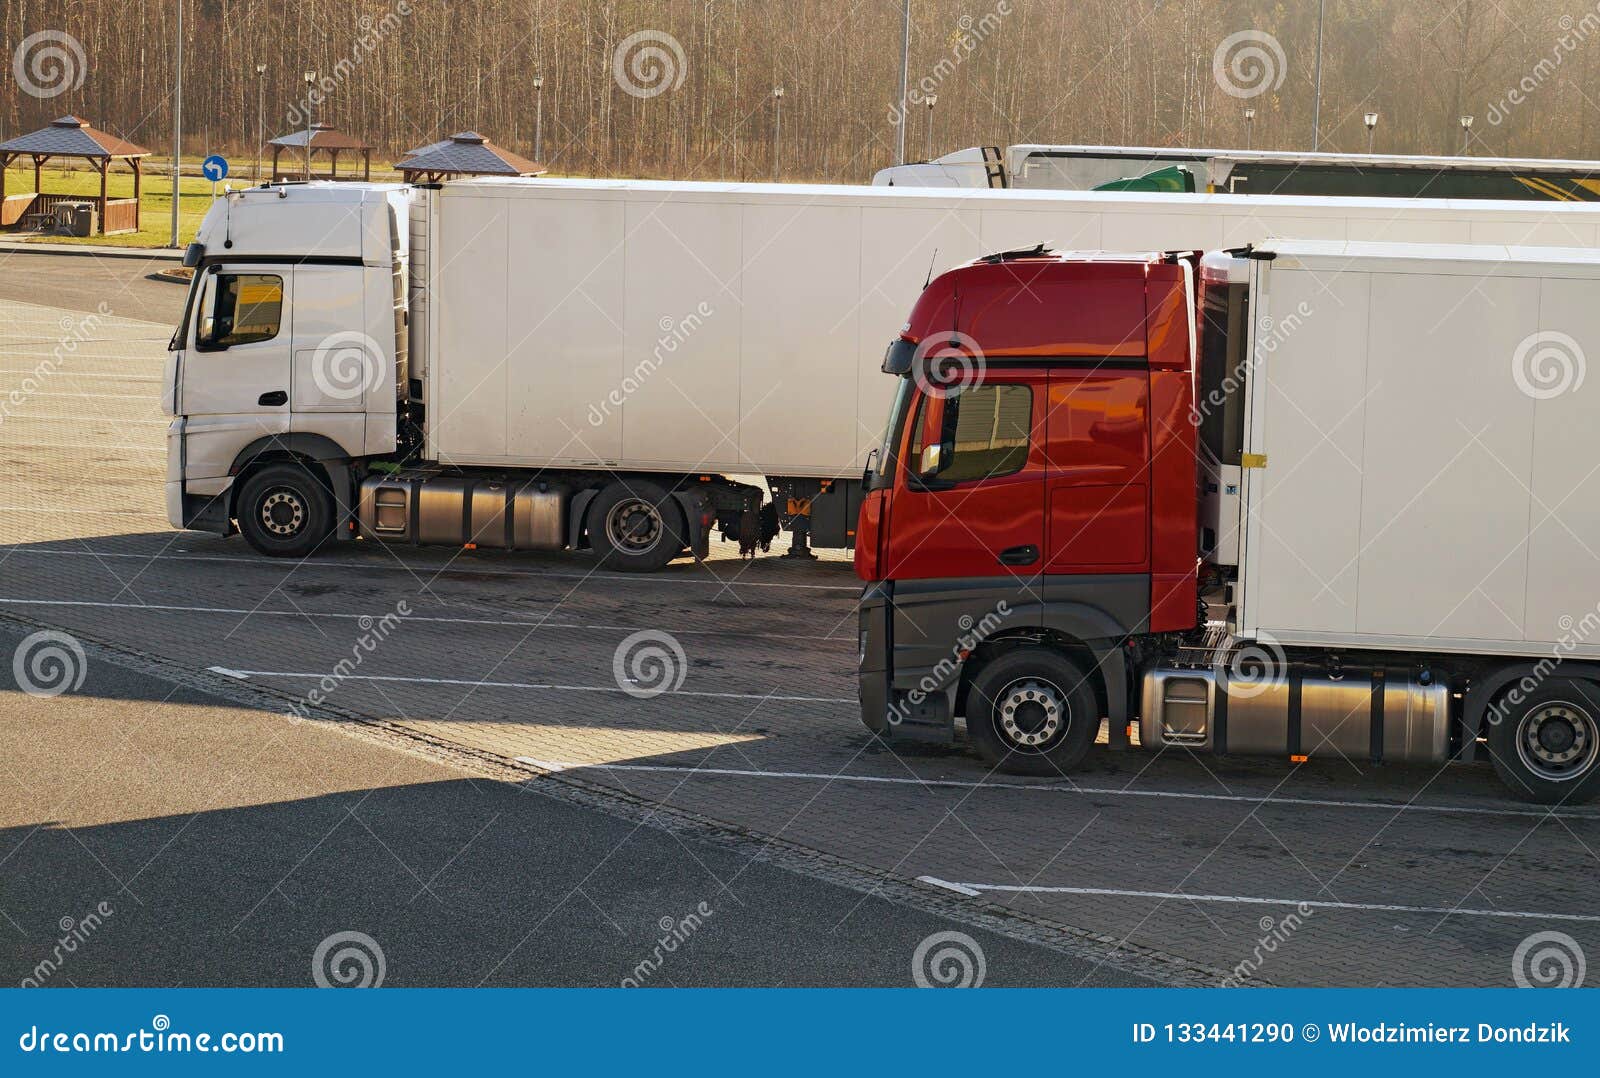 View Of Parked Trucks Parking For Trucks At The Highway Stock Photo